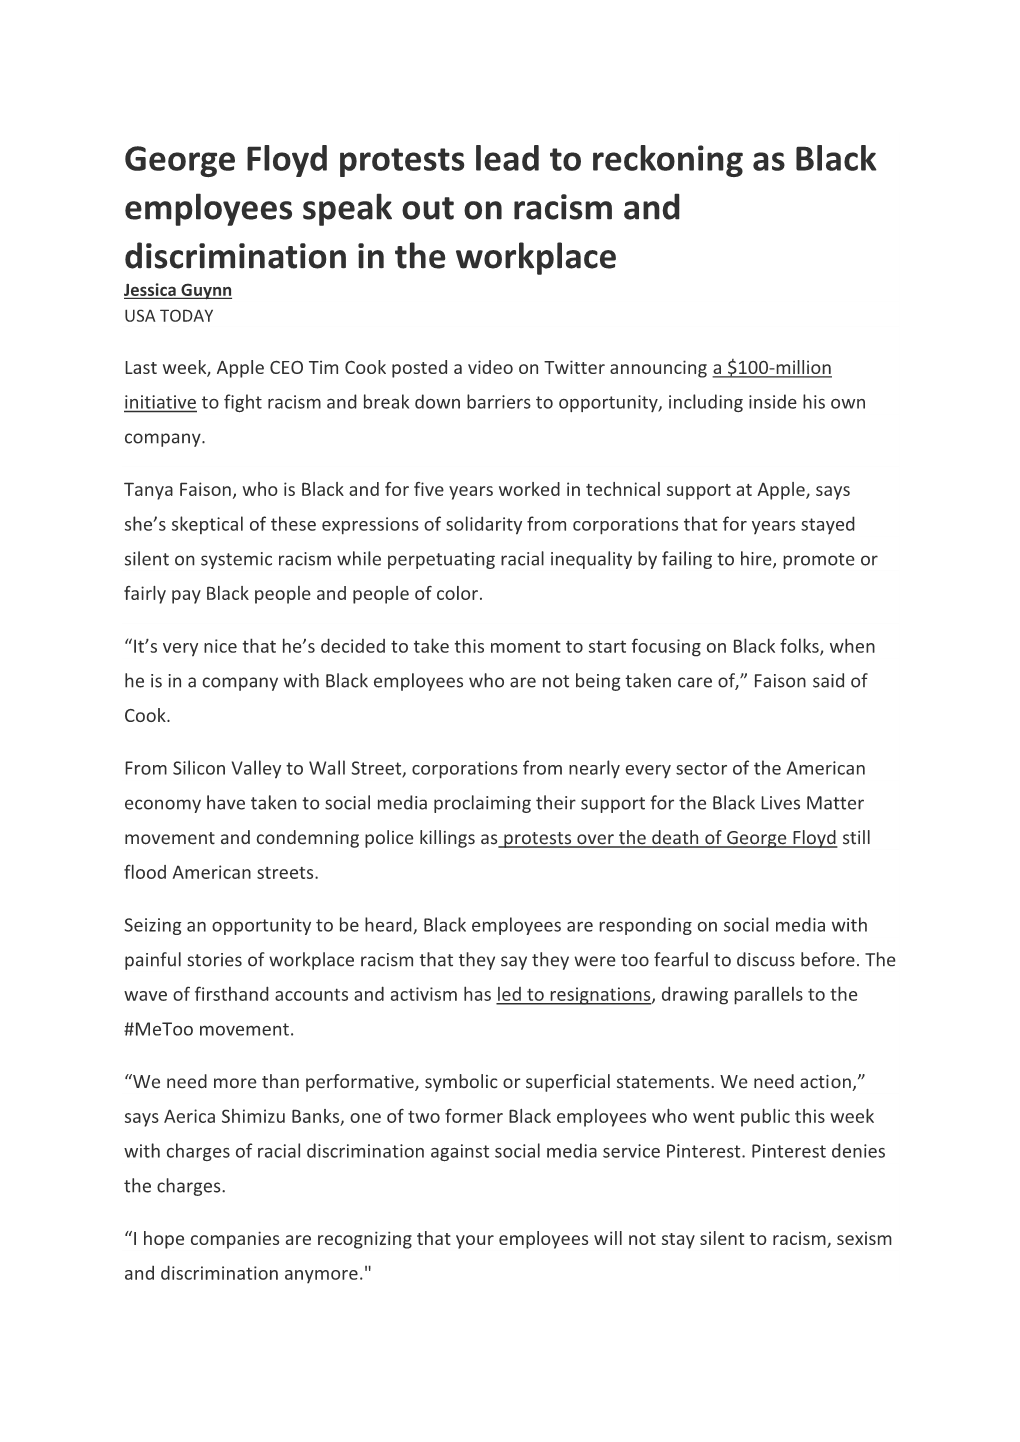 George Floyd Protests Lead to Reckoning As Black Employees Speak out on Racism and Discrimination in the Workplace Jessica Guynn USA TODAY